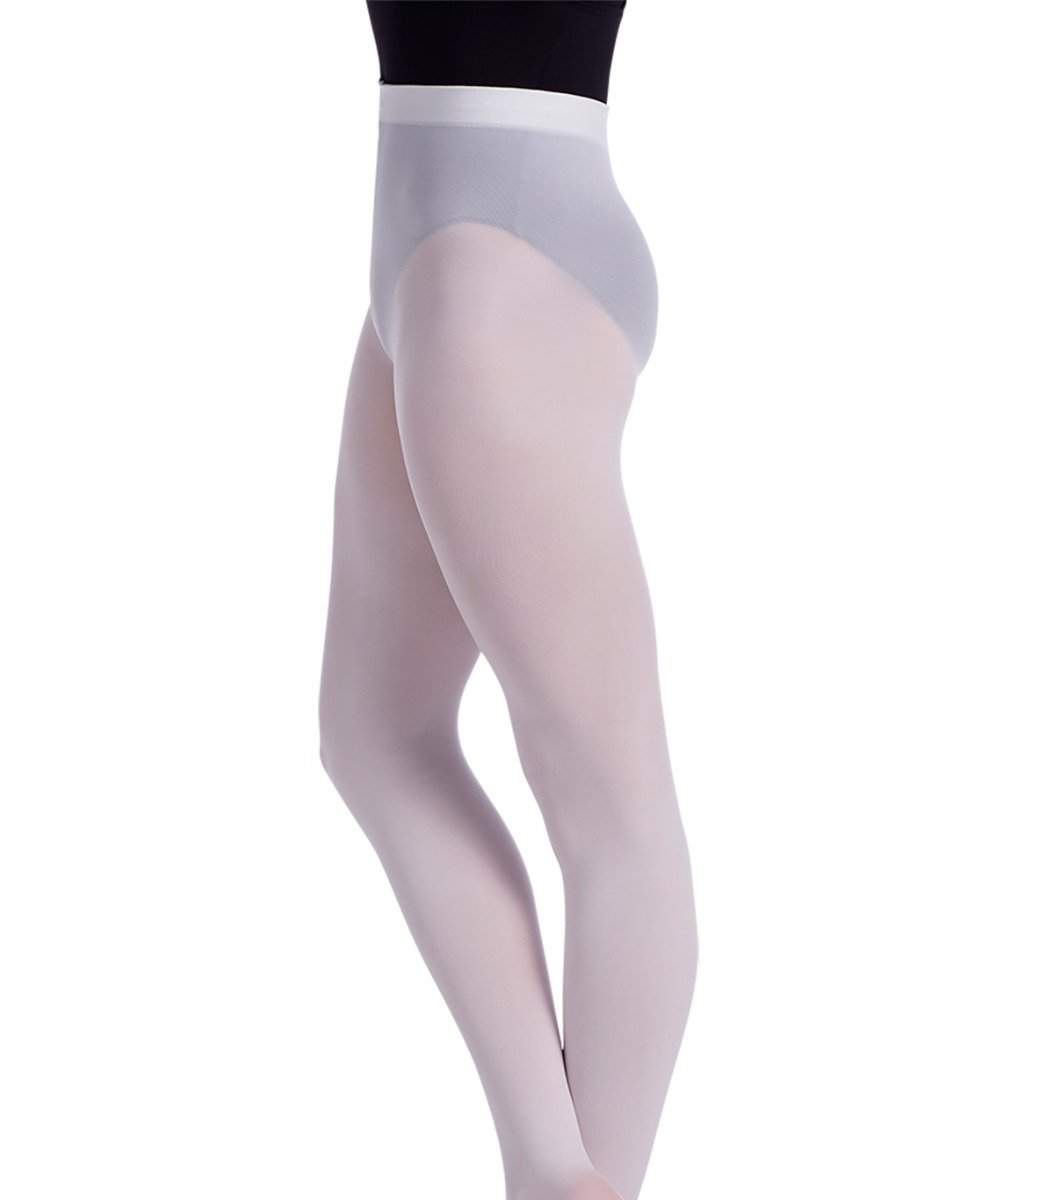  Dance Tights Adult Women Pink Ballet Tights Soft Transition  Footless Pantyhose